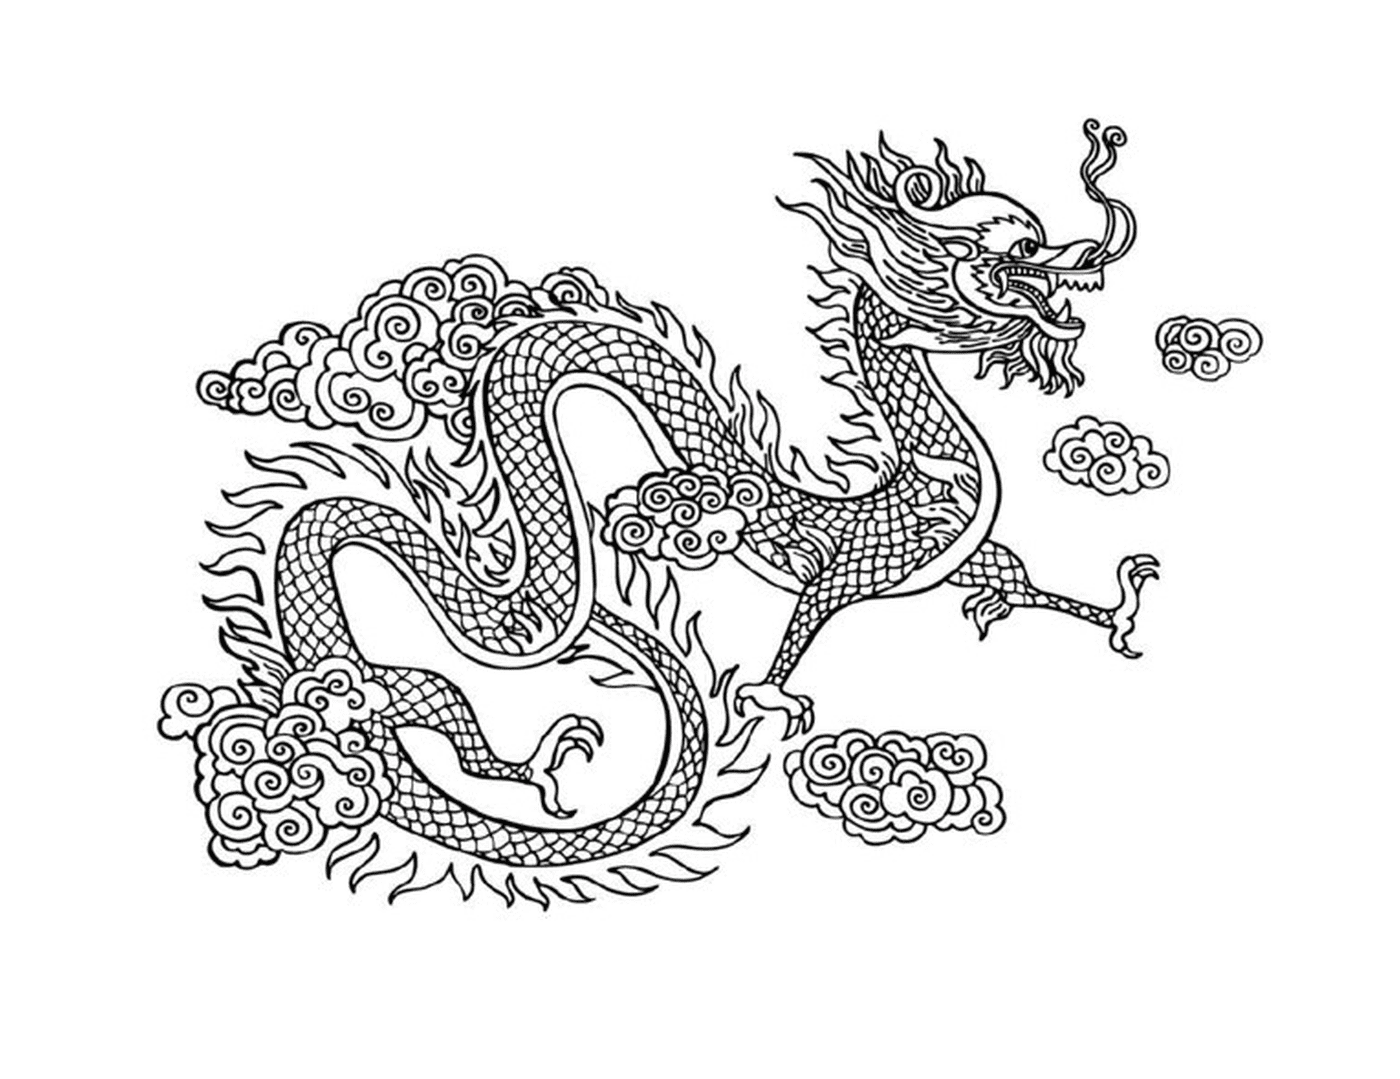  Eastern Dragon with mysterious airs, surrounded by clouds 